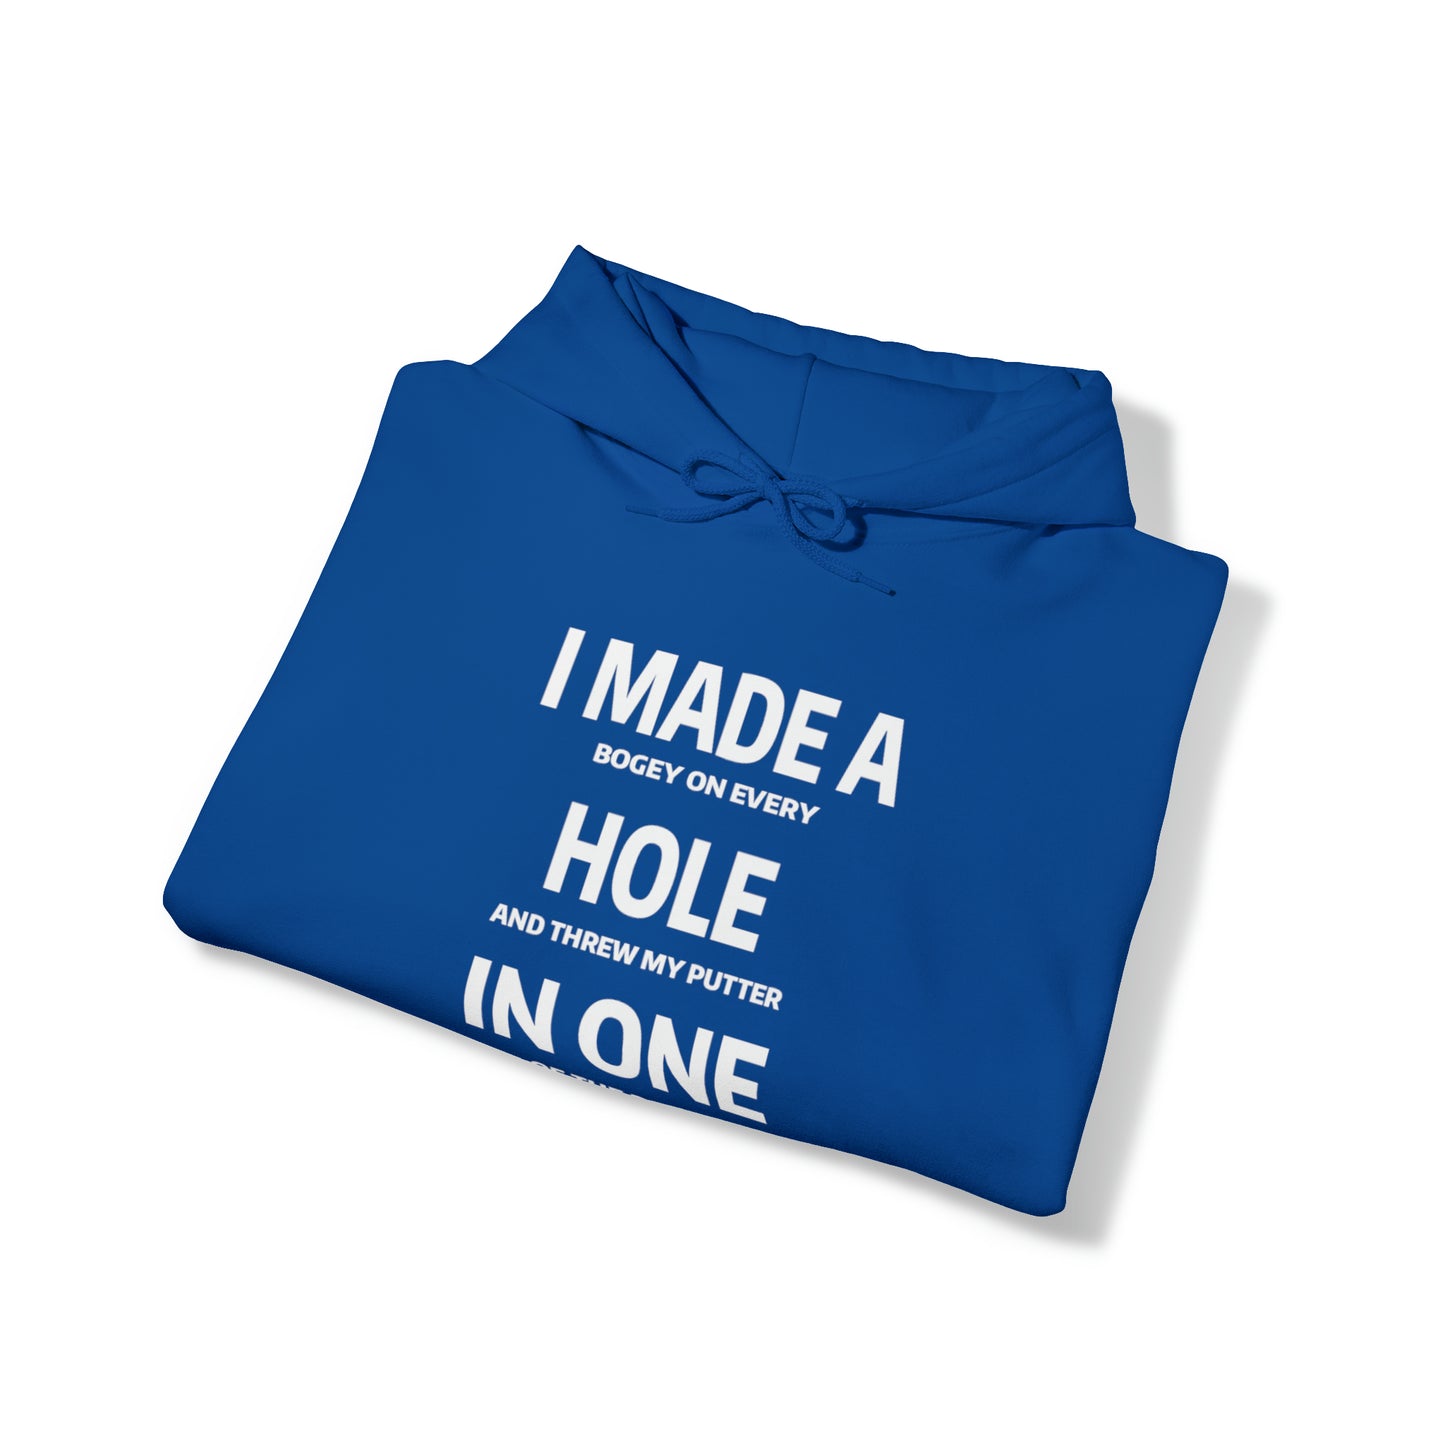 Putt It Behind You: The Hooded Sweatshirt for Letting Go of Mistakes